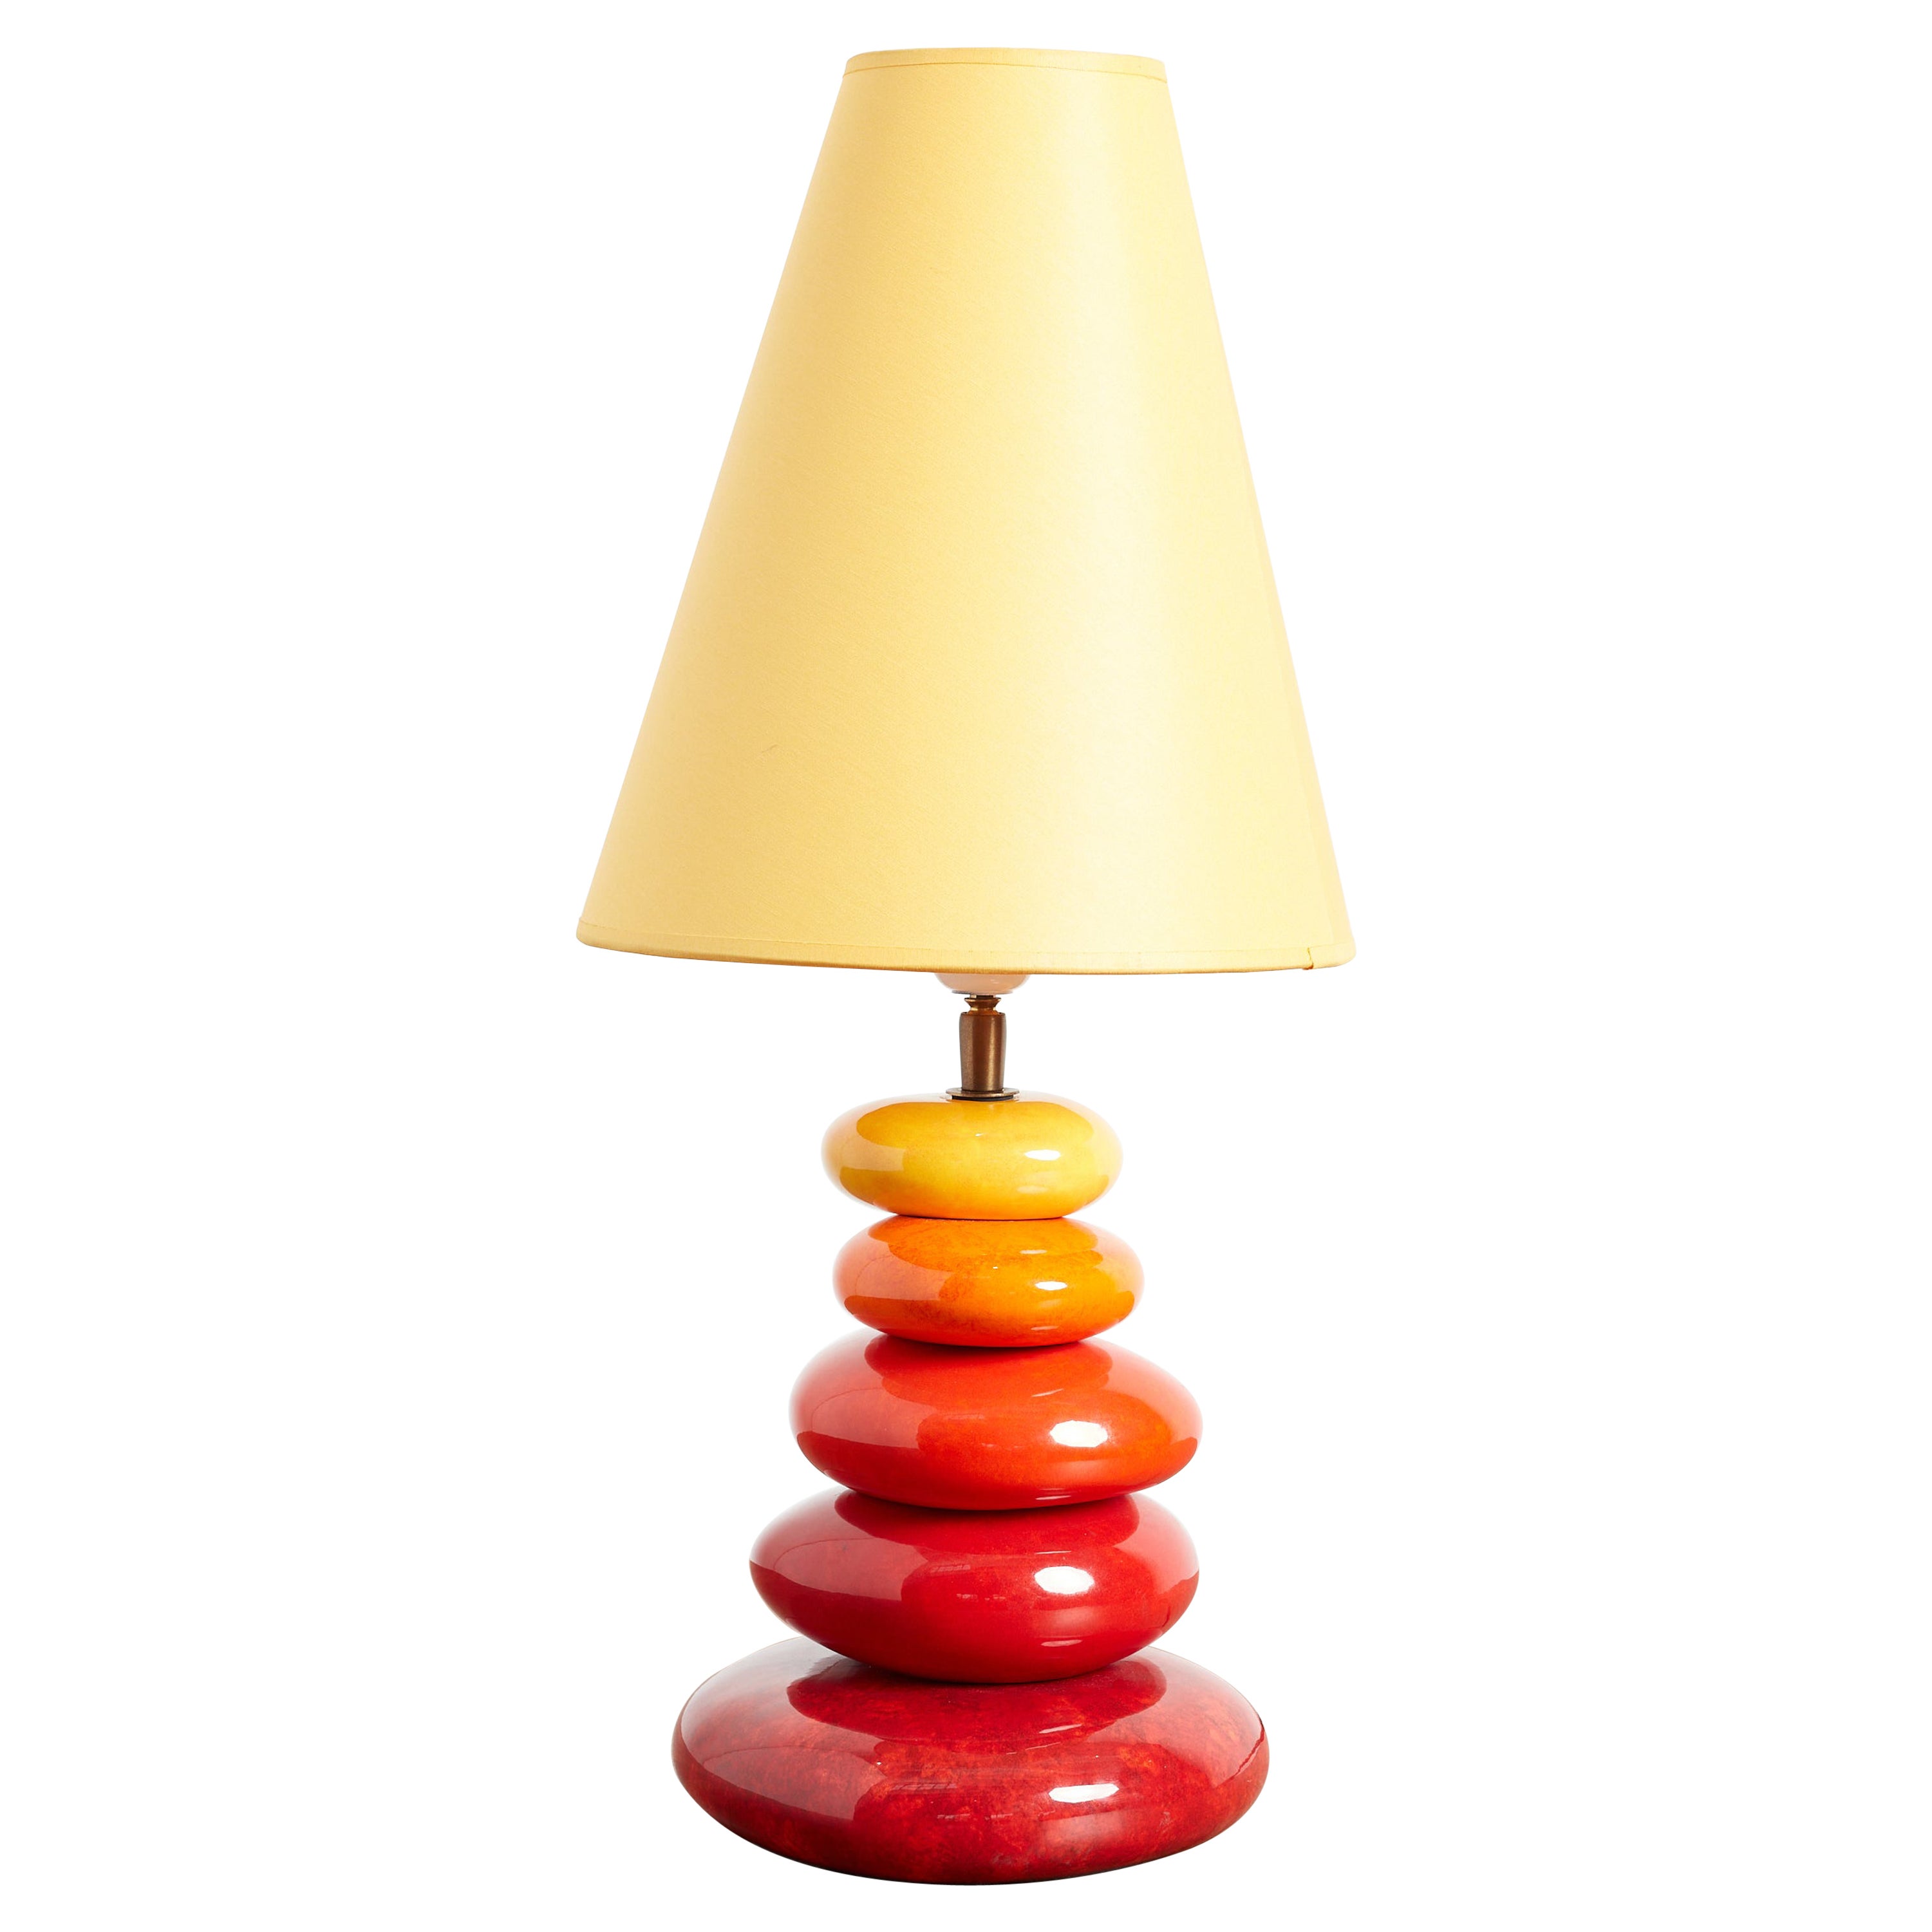 French Ceramic Table Lamp